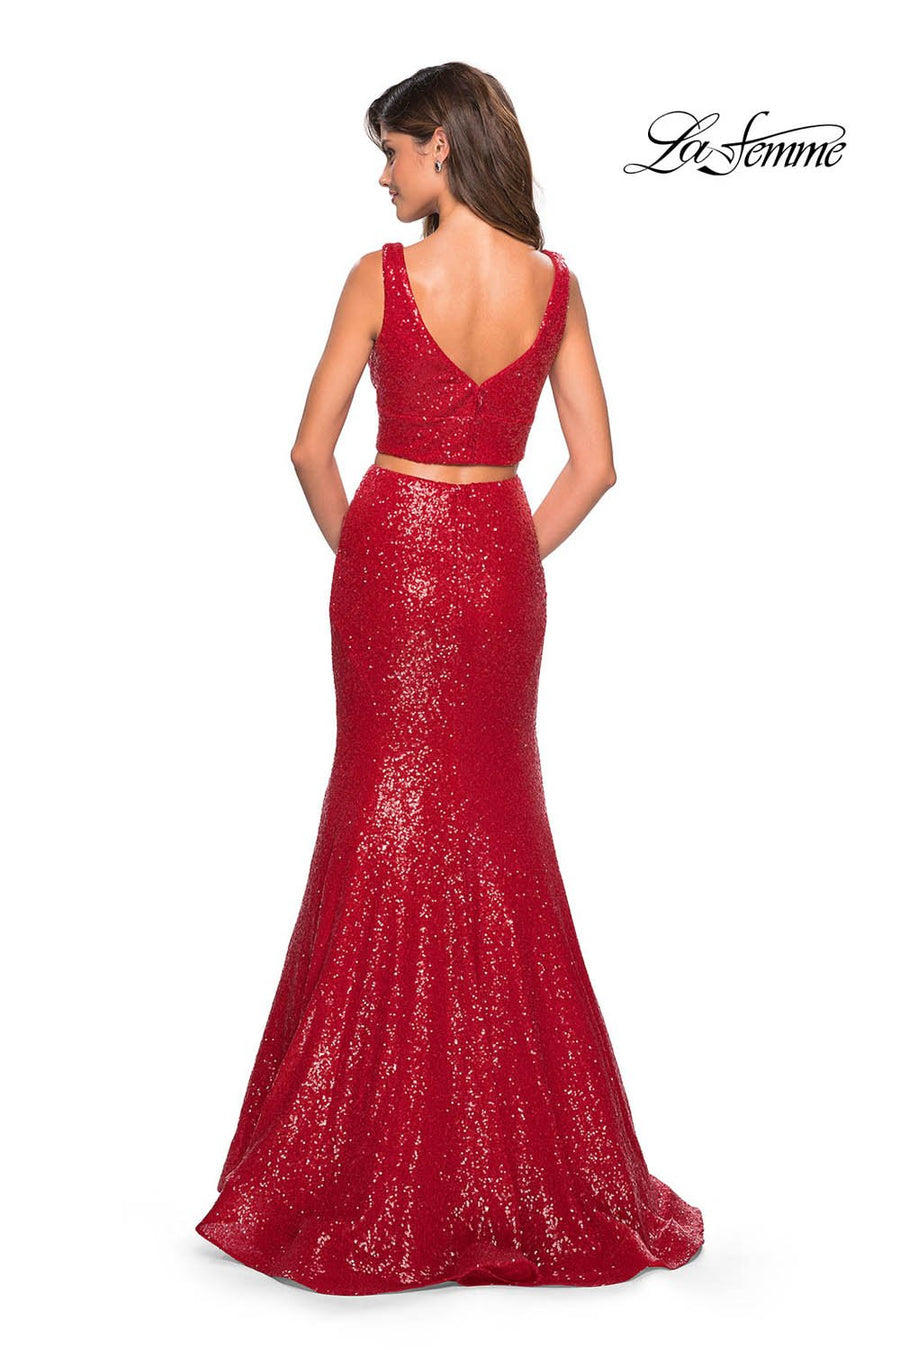 La Femme 27590 prom dress images.  La Femme 27590 is available in these colors: Navy, Red.